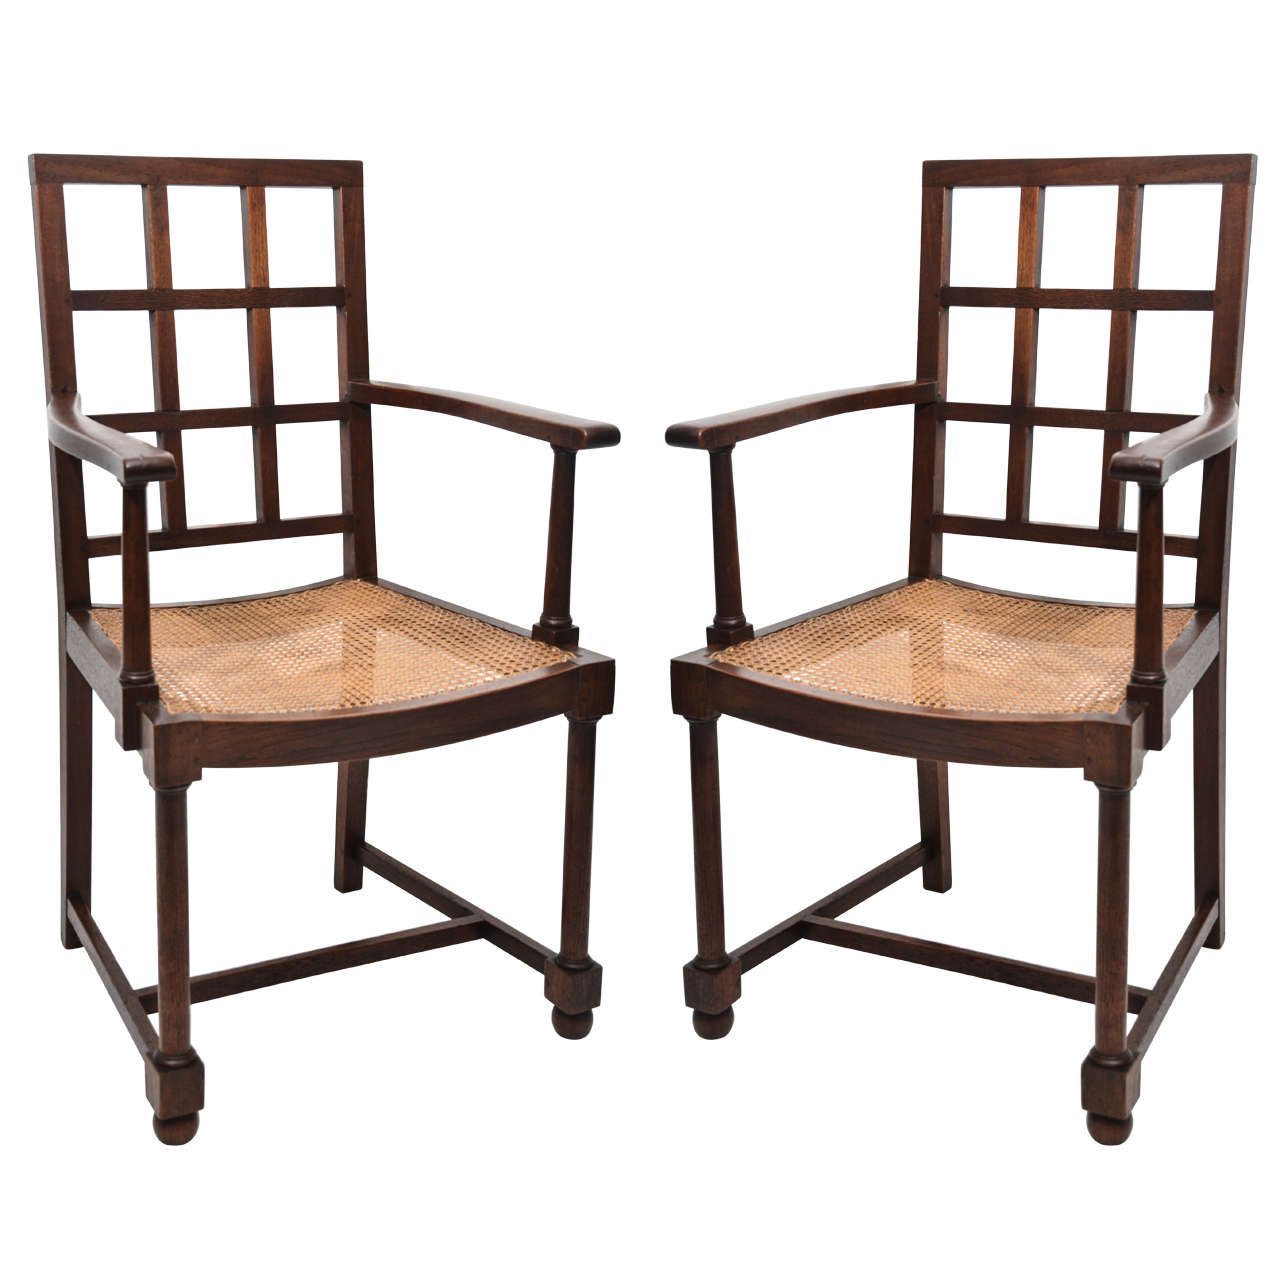 Pair of Teak with Caned Seats Armchairs, Attributed to Heal & Co For Sale